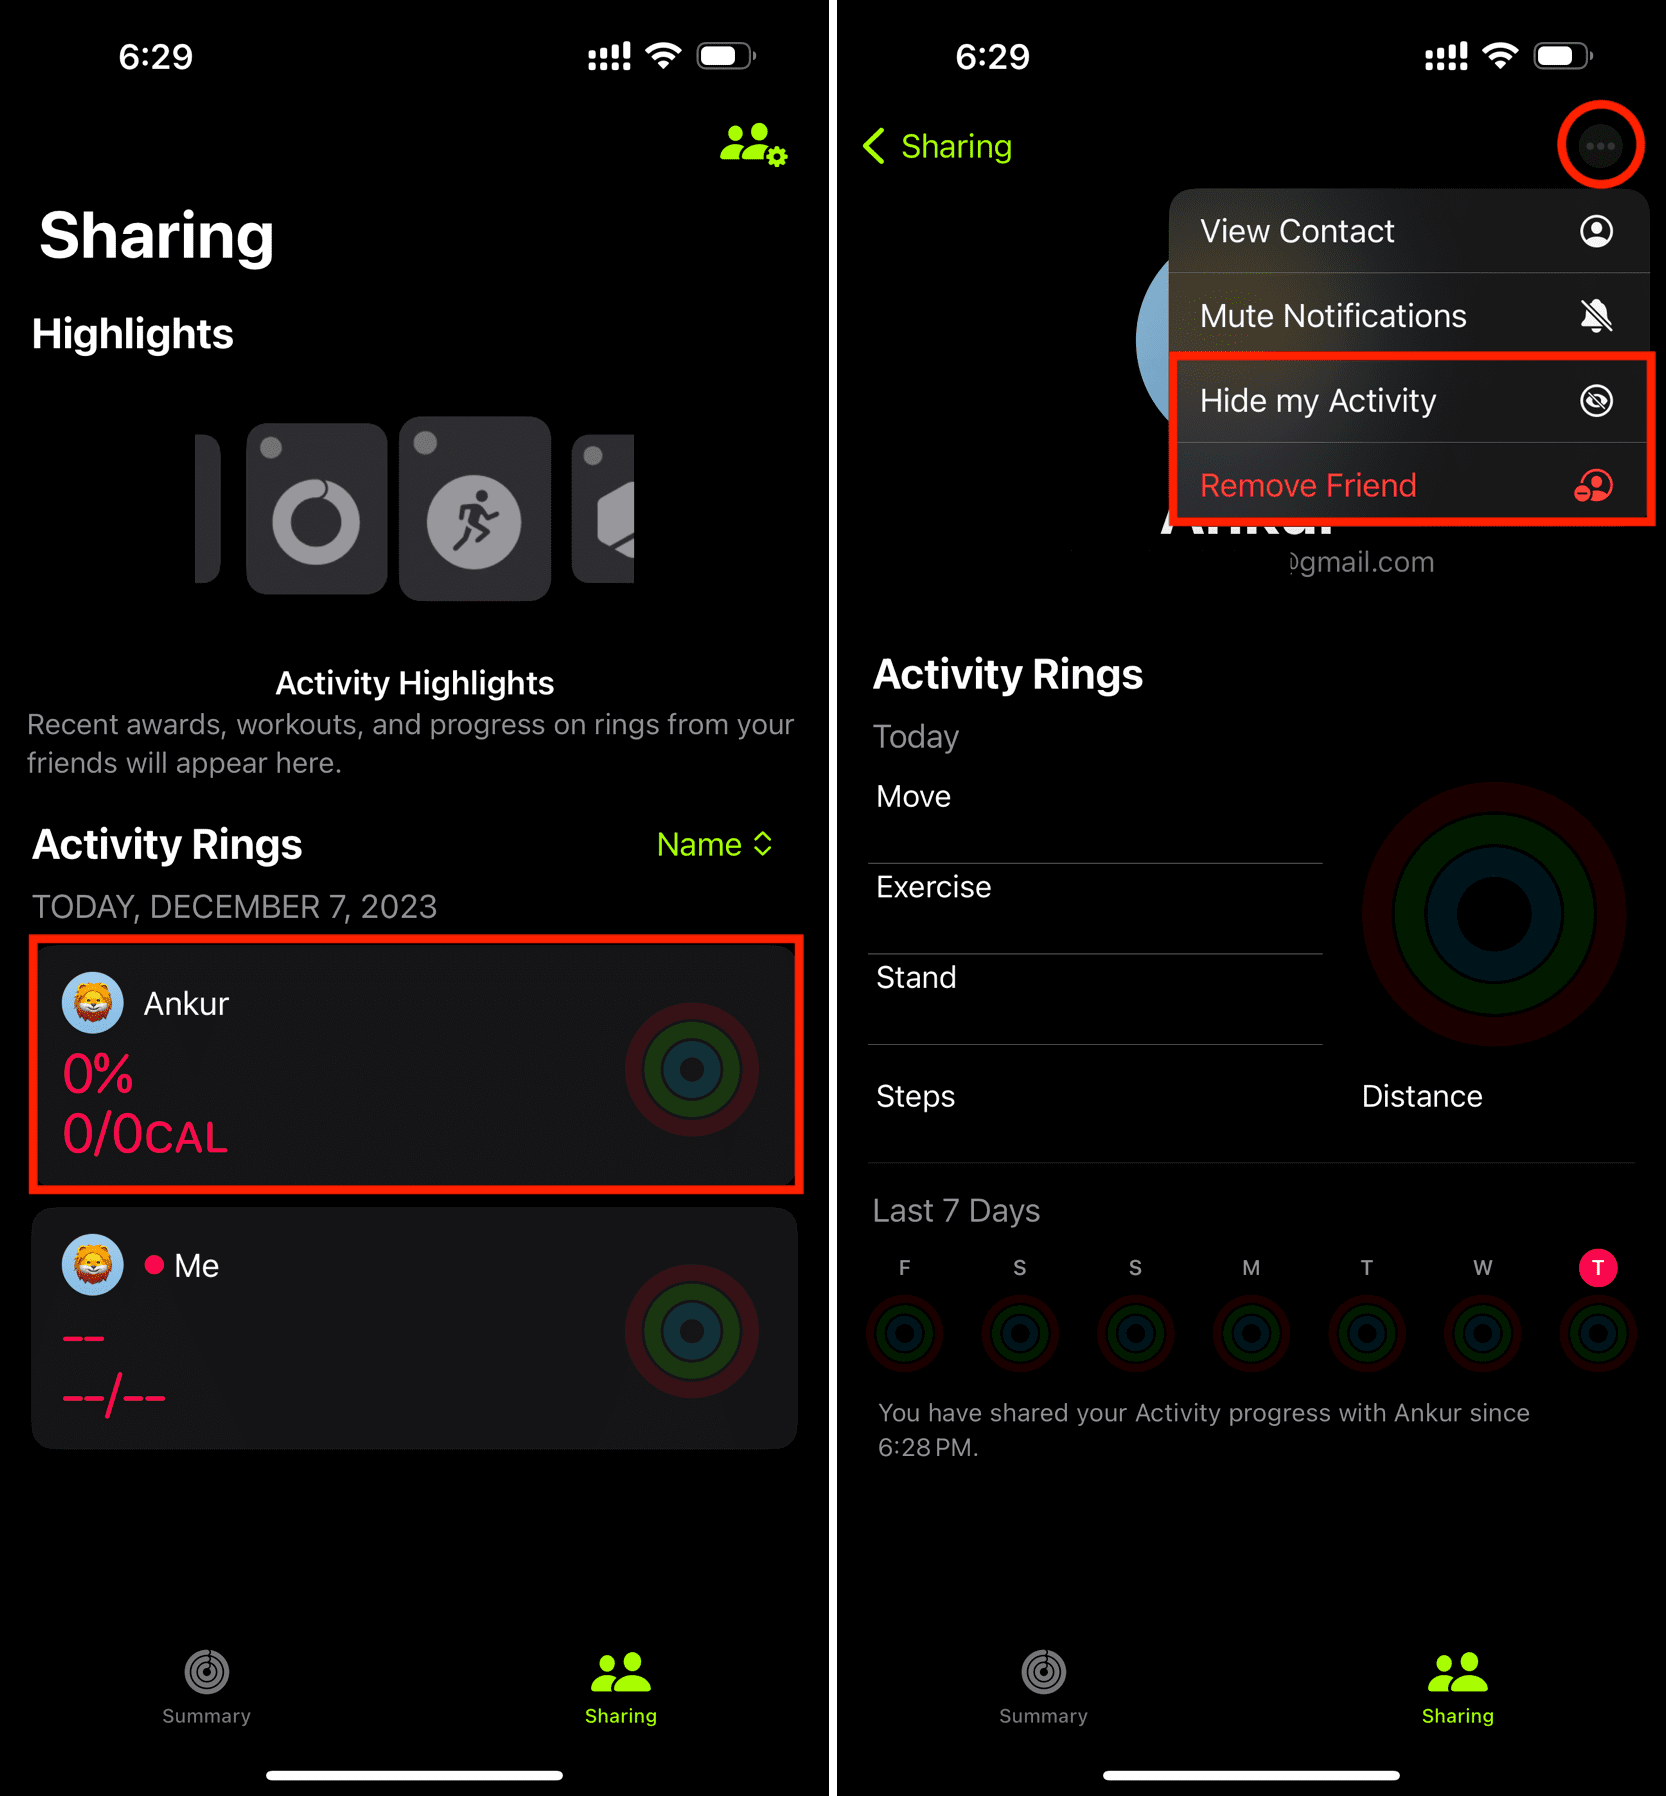 Hide my Activity or Remove Friend in Sharing section of Fitness app on iPhone